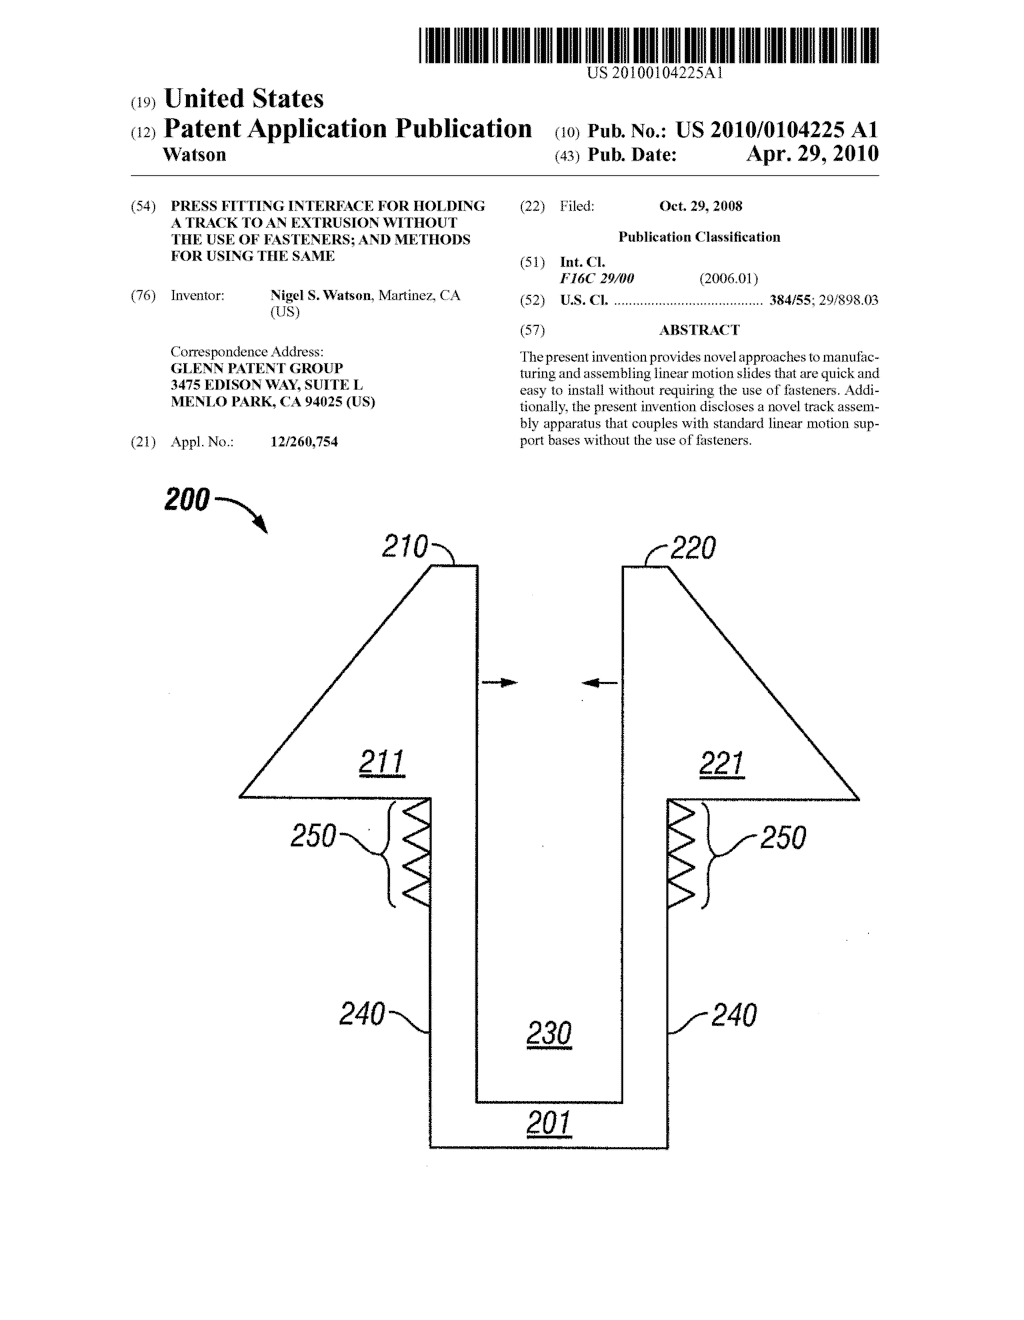 Press Fitting Interface for Holding a Track to an Extrusion Without the Use of Fasteners; and Methods for Using the Same - diagram, schematic, and image 01